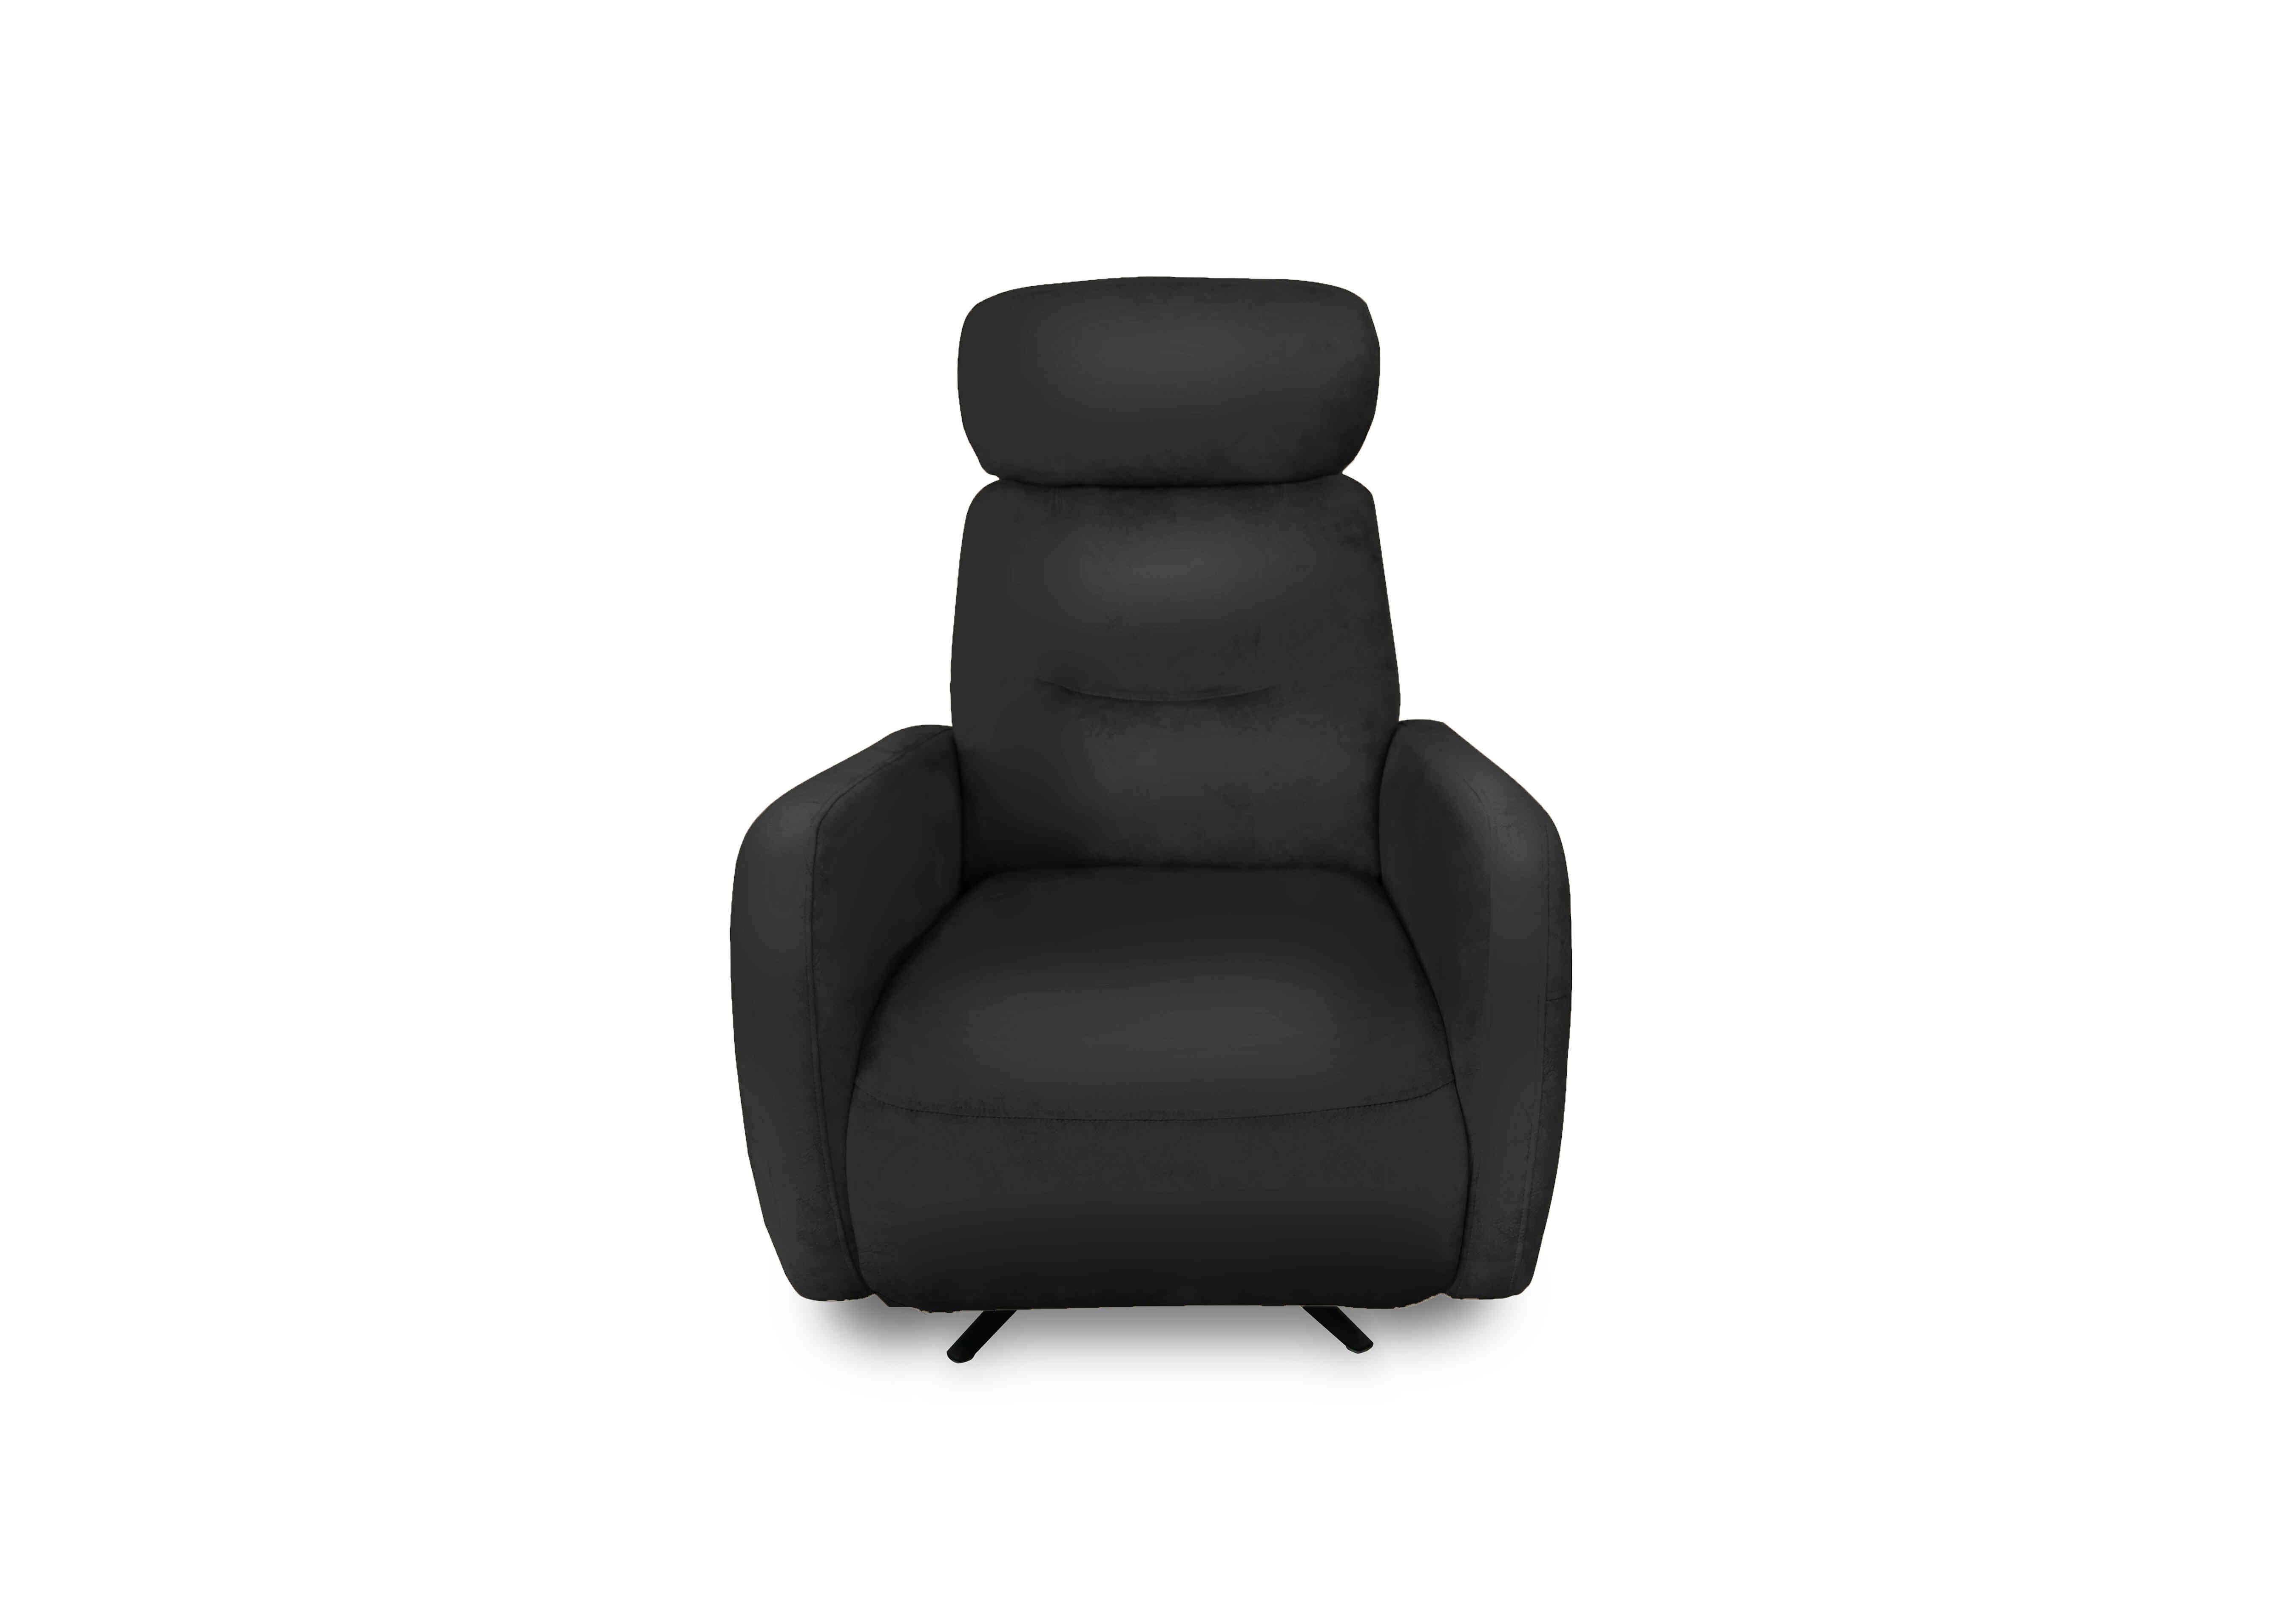 Designer Chair Collection Tokyo Leather Manual Recliner Swivel Chair in Bv-3500 Classic Black on Furniture Village